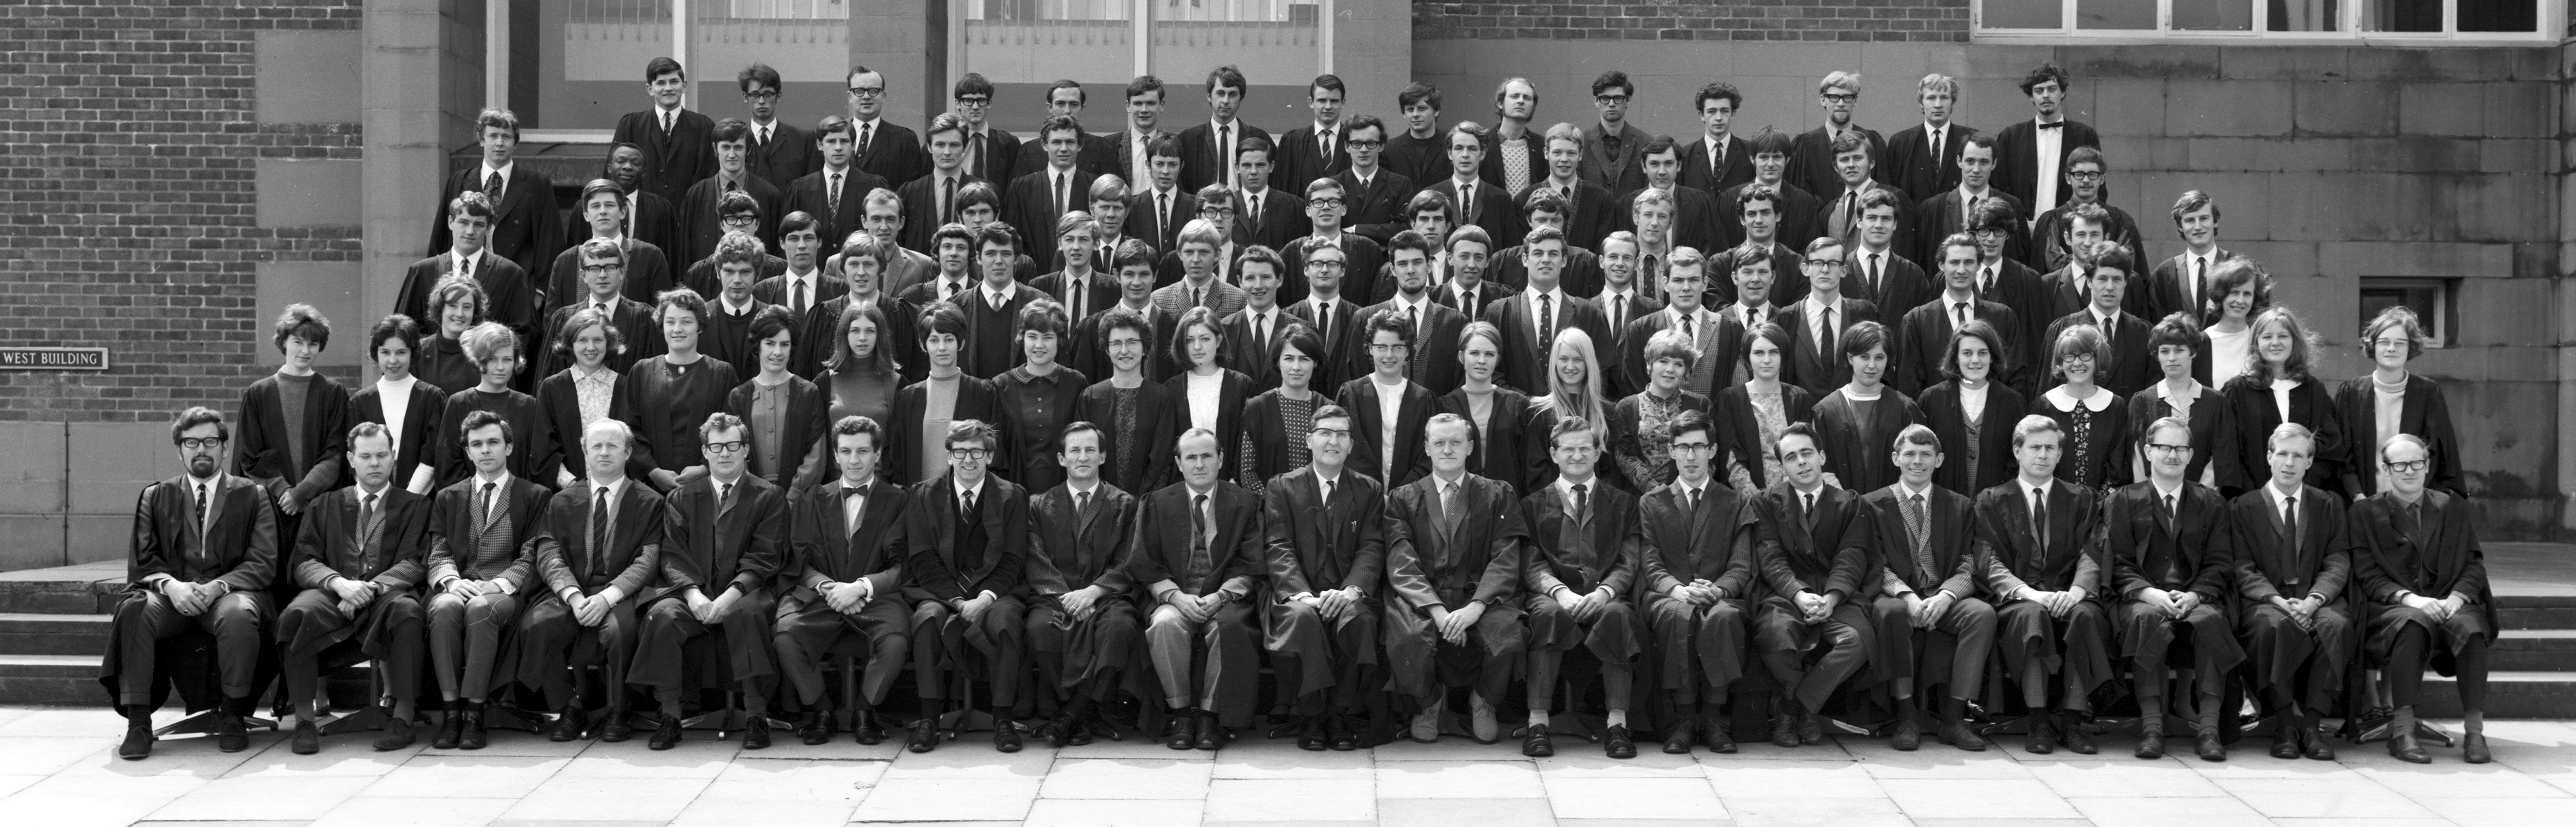 Geography Department Undergraduate Group photo from 1968